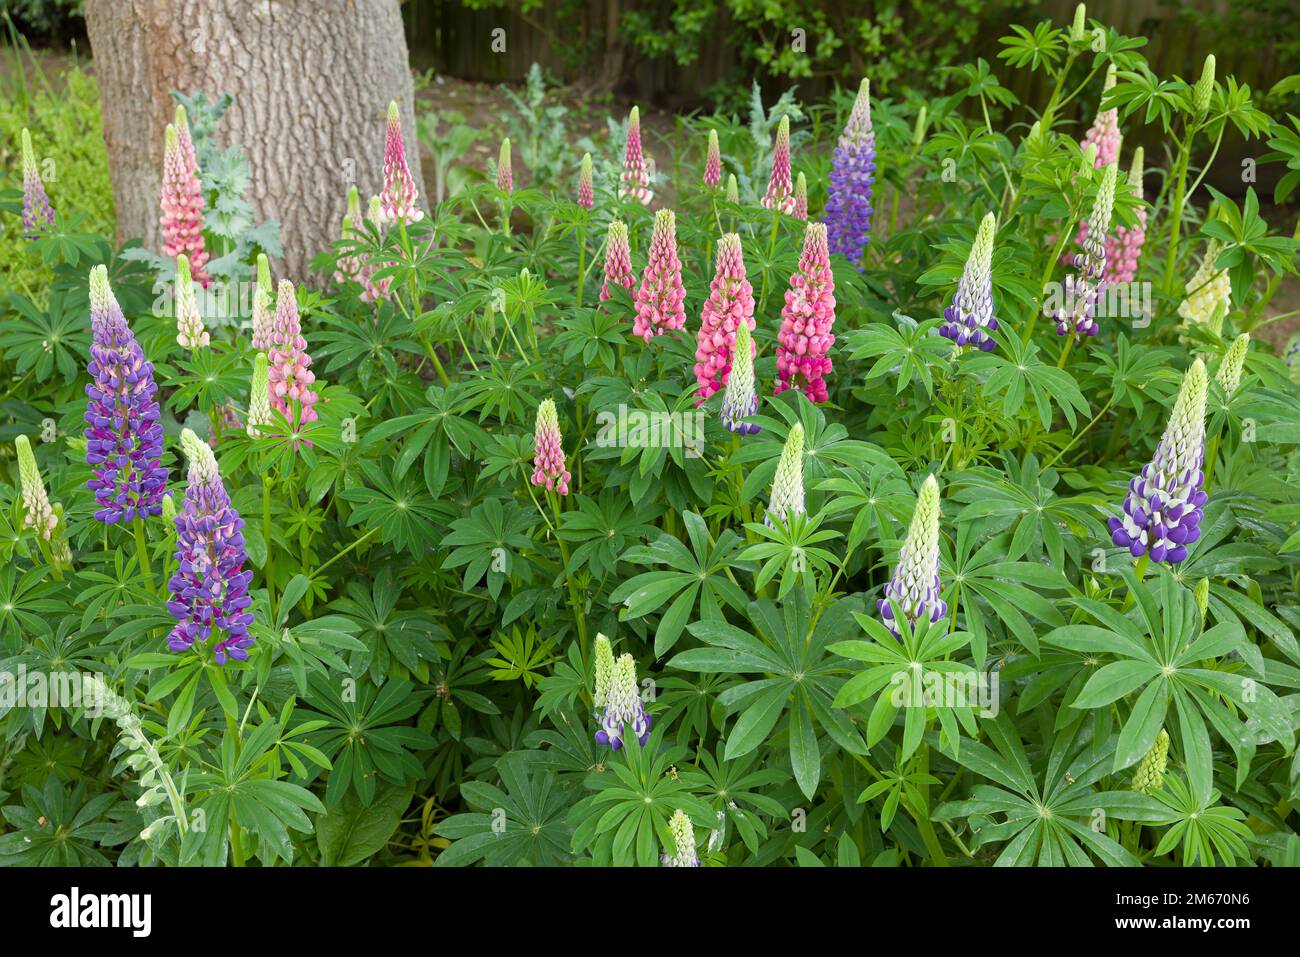 Lupinus, perennial lupin plants with pink and purple flowers in a flower bed in an English back garden Stock Photo